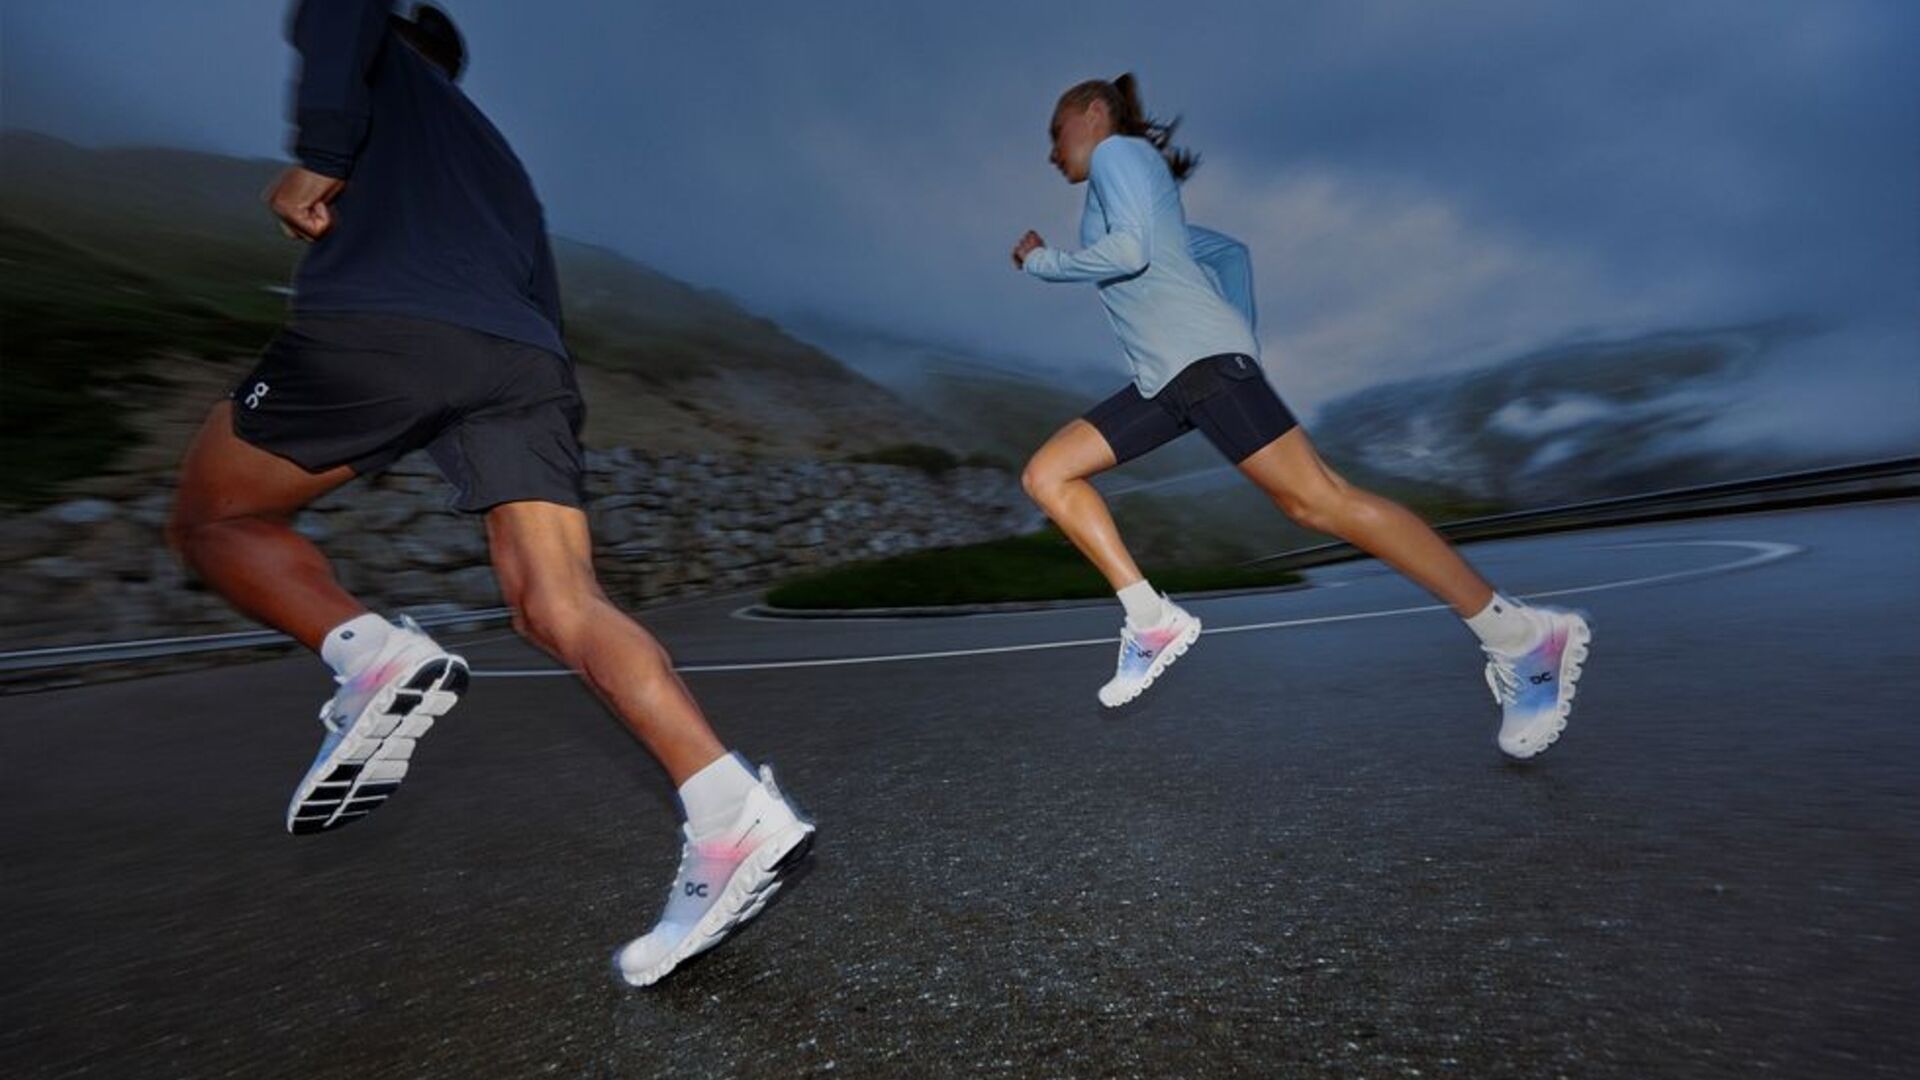 Two runners in action with the On Cloudprime carbon shoes